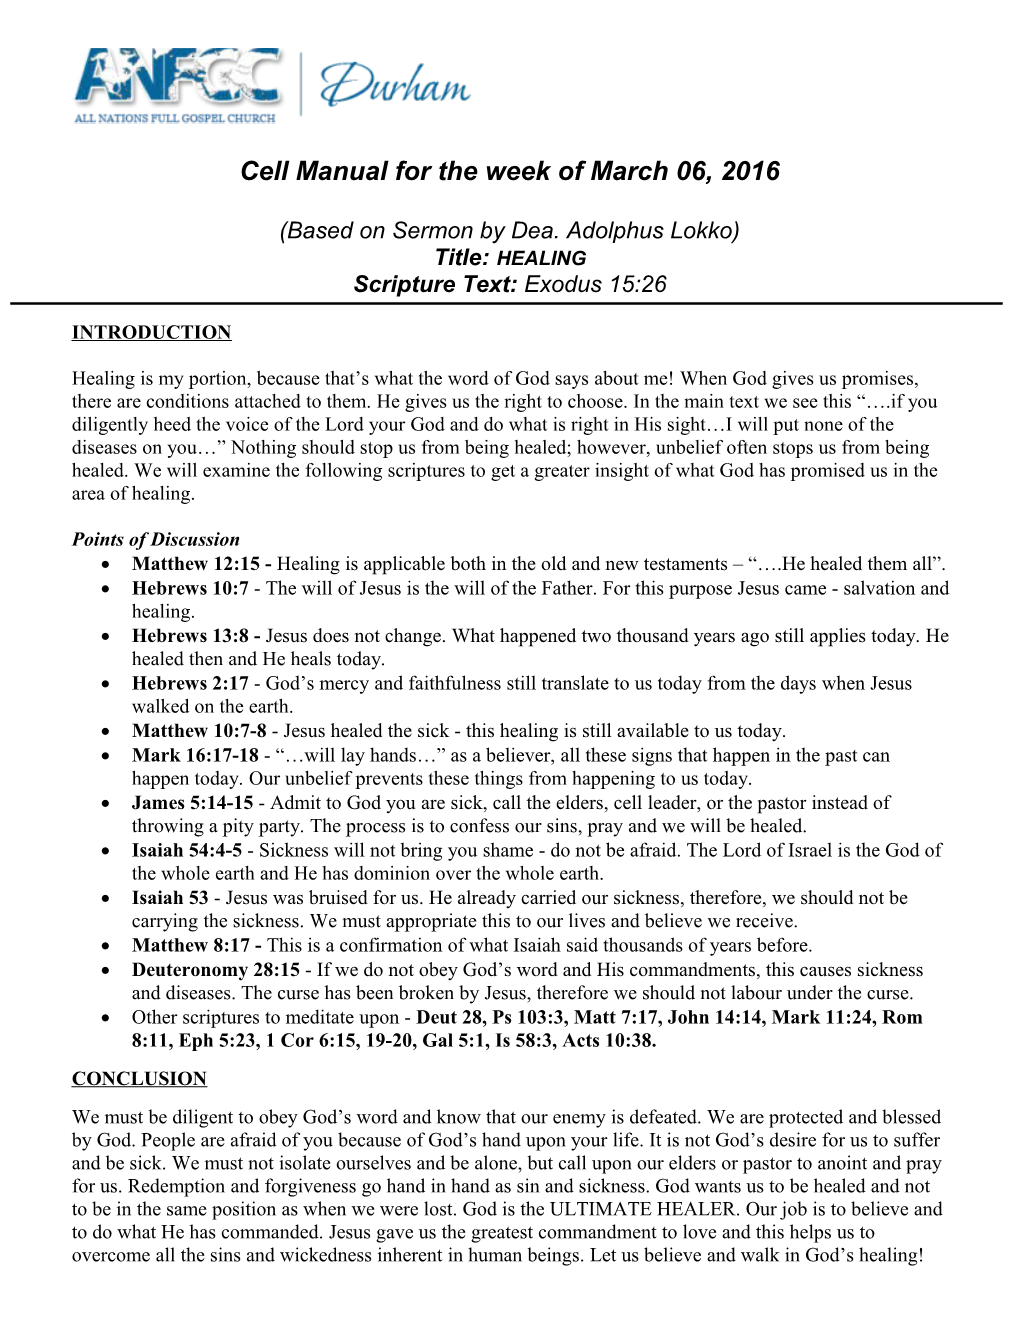 Cell Manual for the Week of March 06, 2016